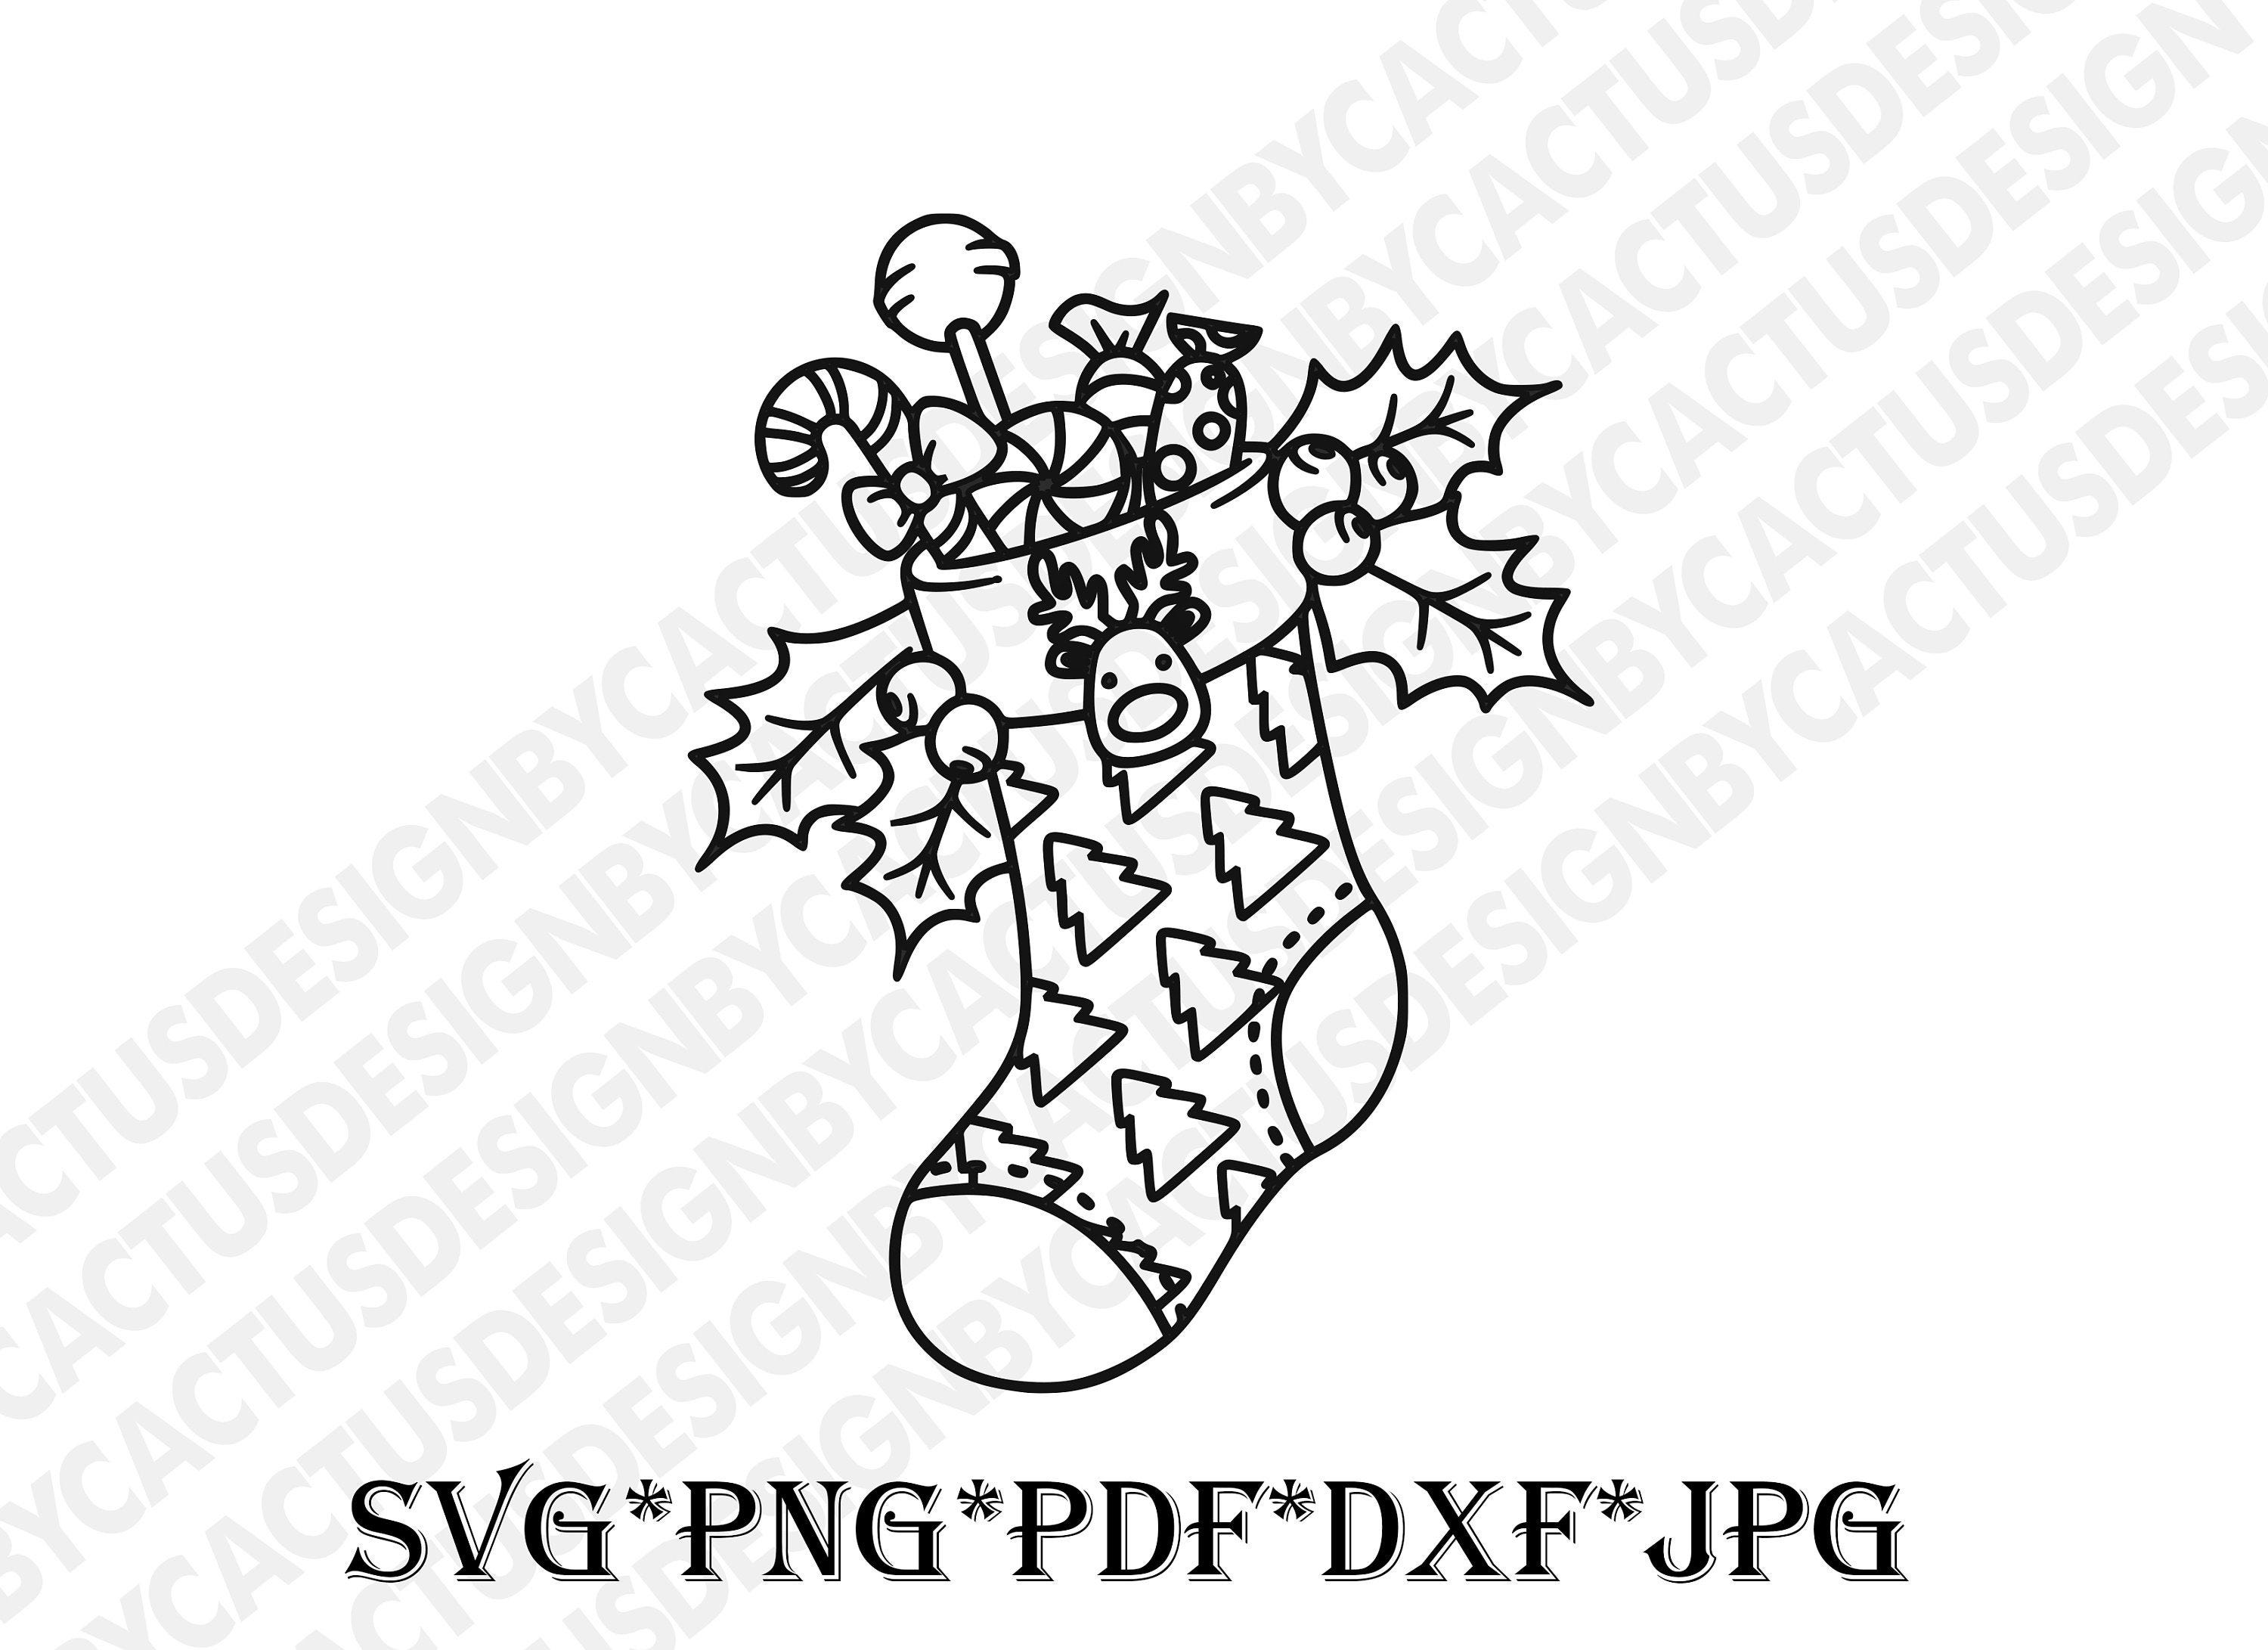 Stocking Svg,Christmas Stocking Svg,Gift Svg,Christmas Svg,Holiday Svg ,Ornament Svg,Holiday Svg, Svg, Dxf, Png,Cricut Files, Vector,Stencil